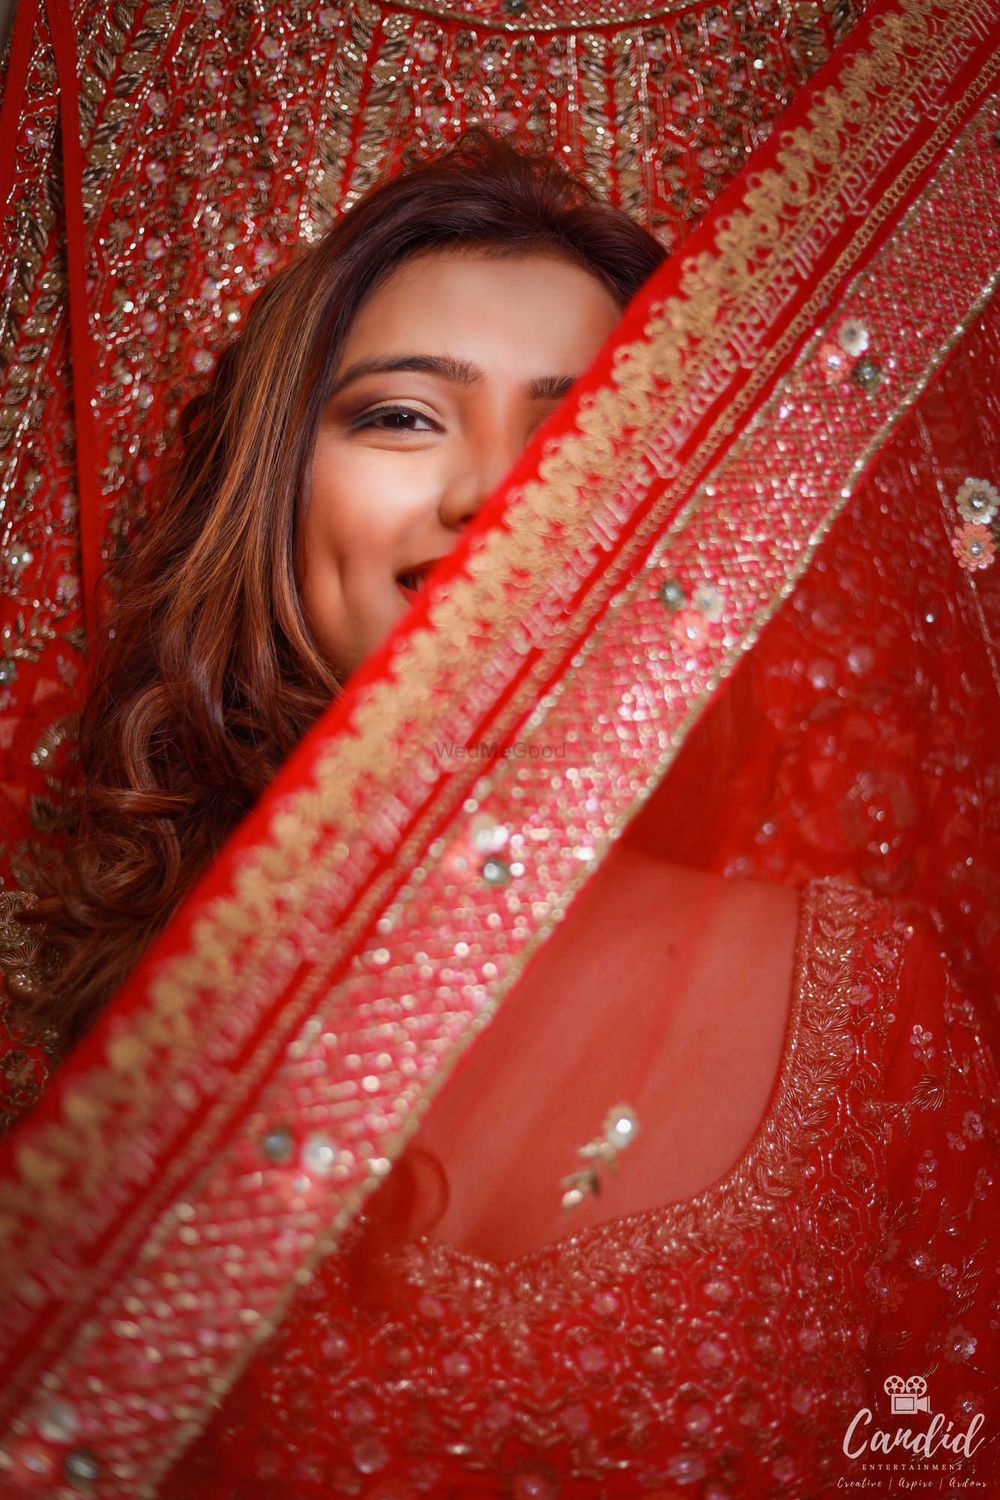 Photo From Smith + Priyanka Wedding Clicks 2020 - By Candid Entertainment